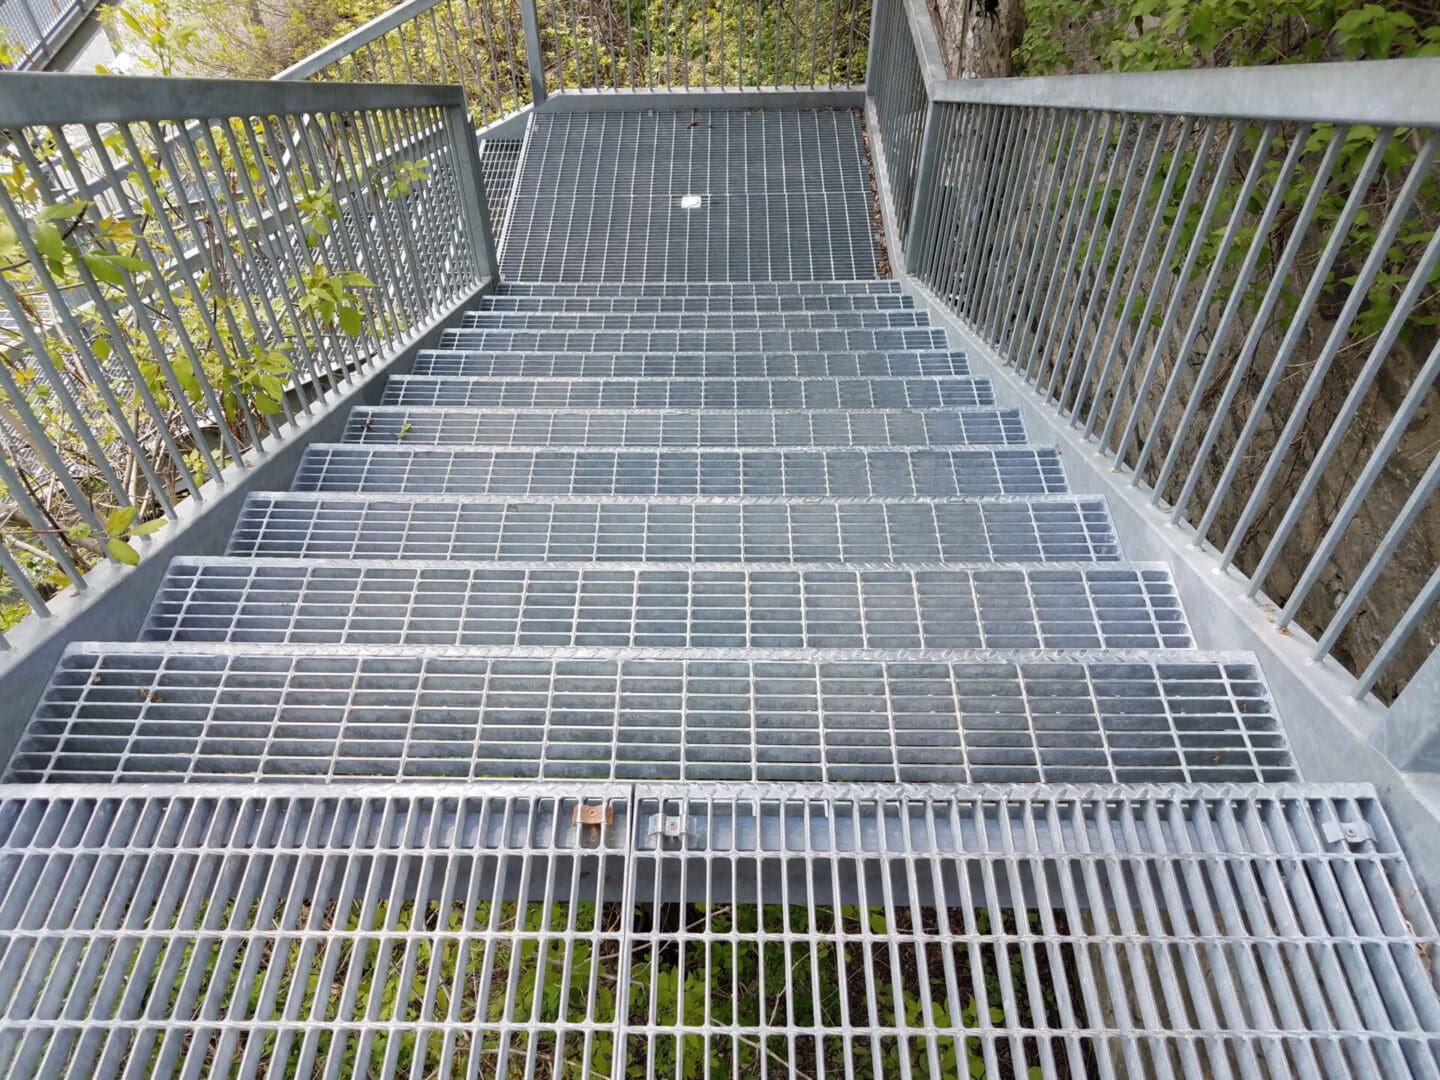 A metal walkway with steps going up to the top.